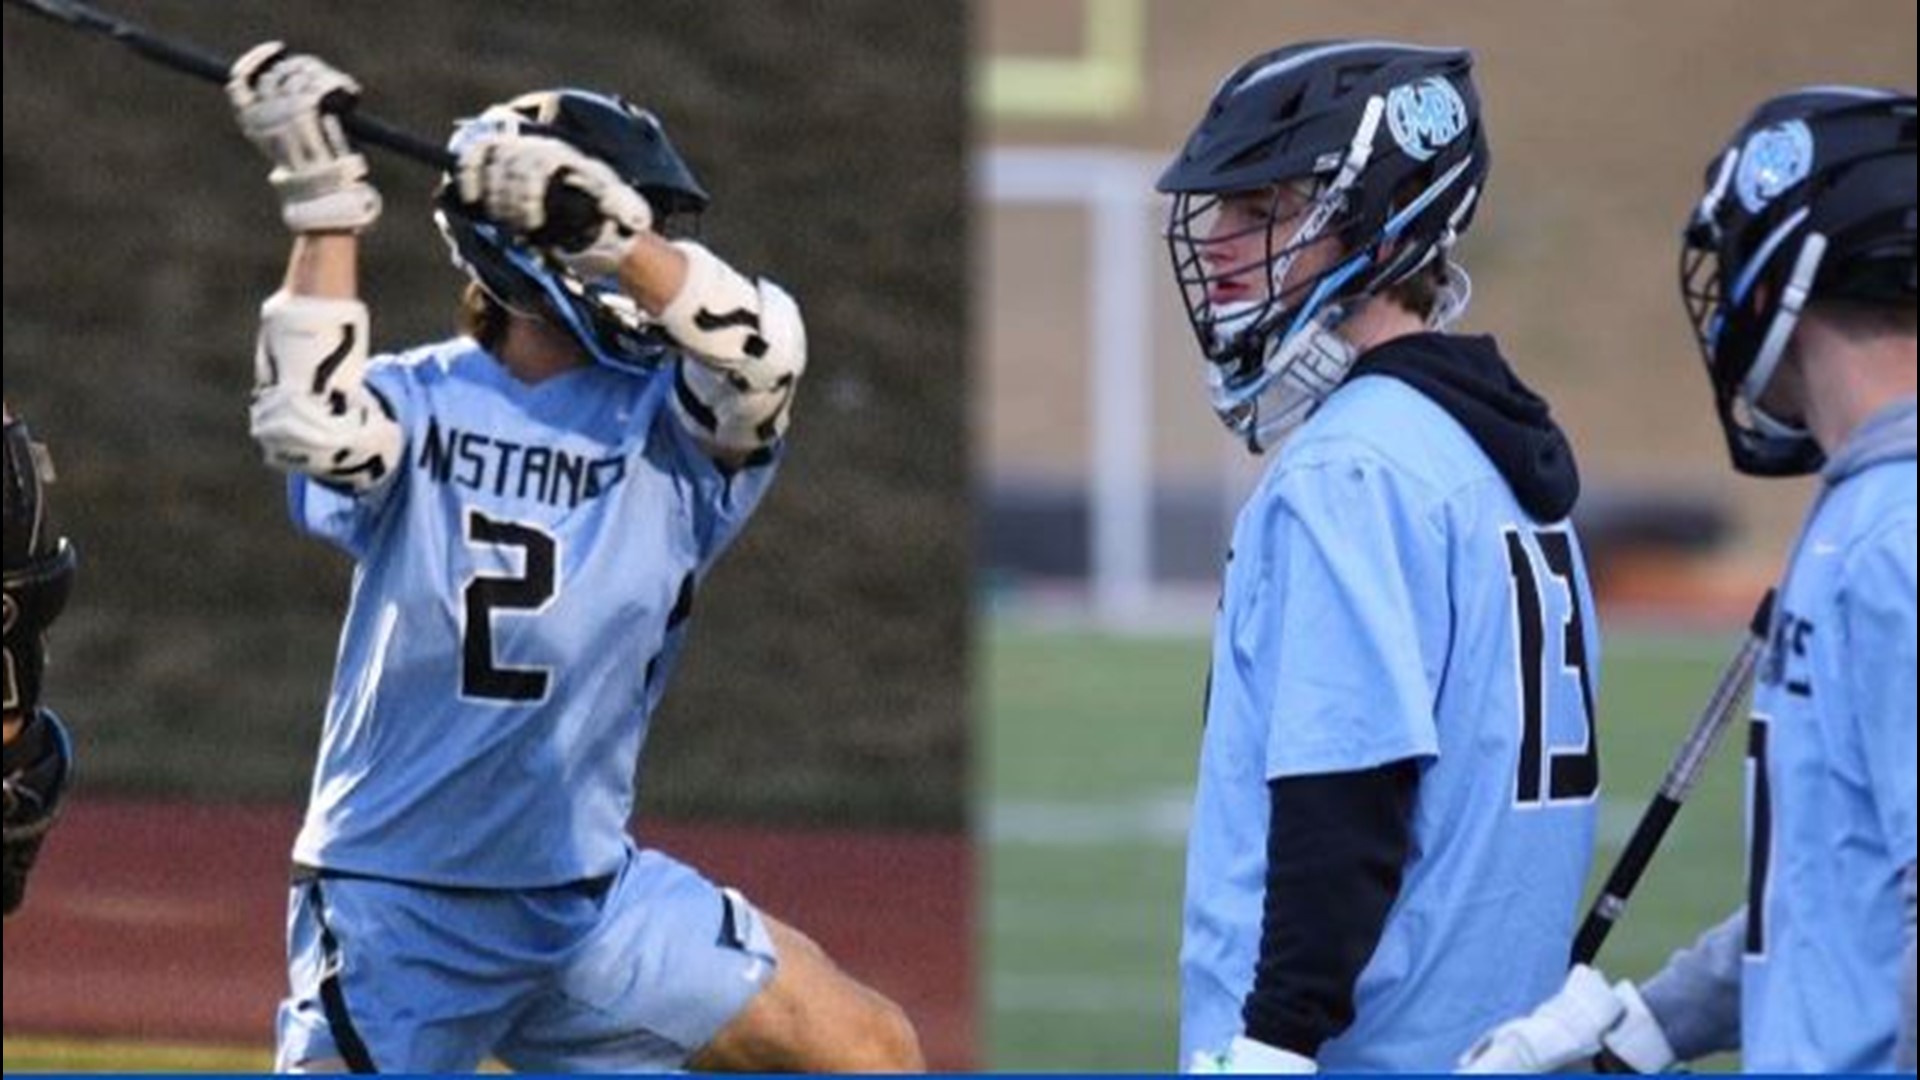 Twins Seth and Jake Doyle will be missing out on their senior year of lacrosse for Mountain Range, but they can lean on each other during their time at home.